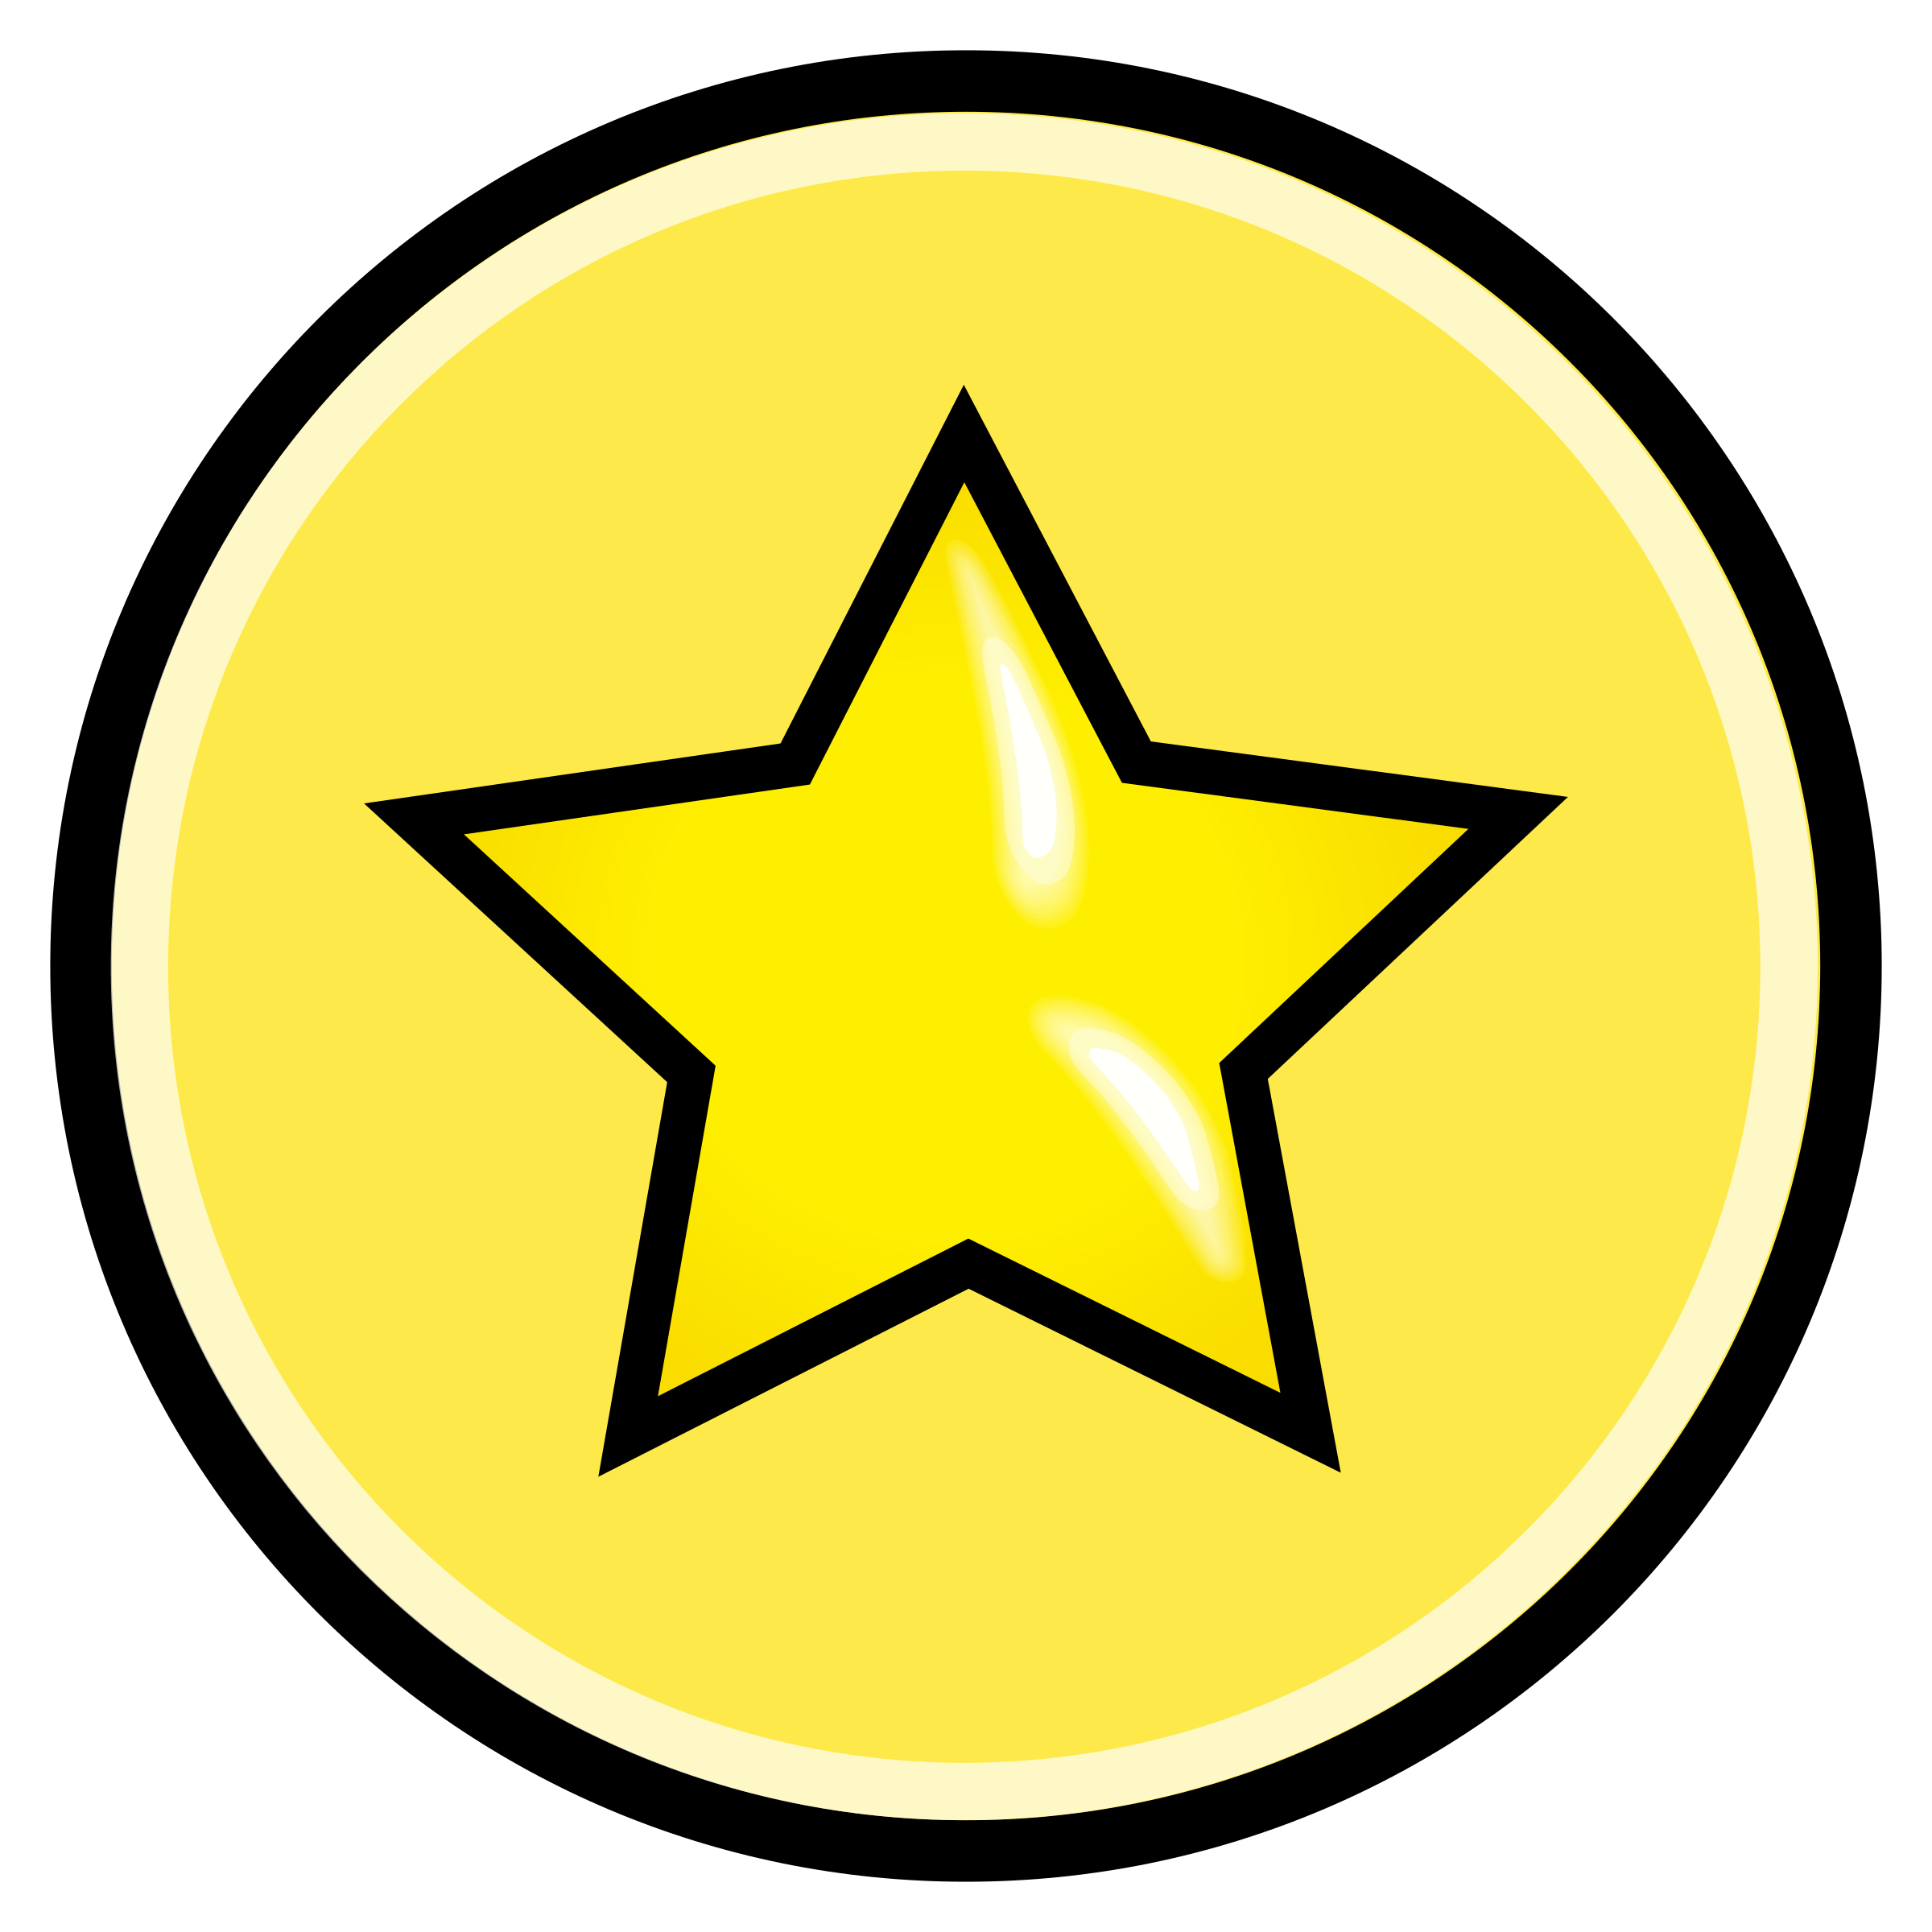 Yellow Star Circle Logo - Button With Yellow Star Vector Clipart image - Free stock photo ...